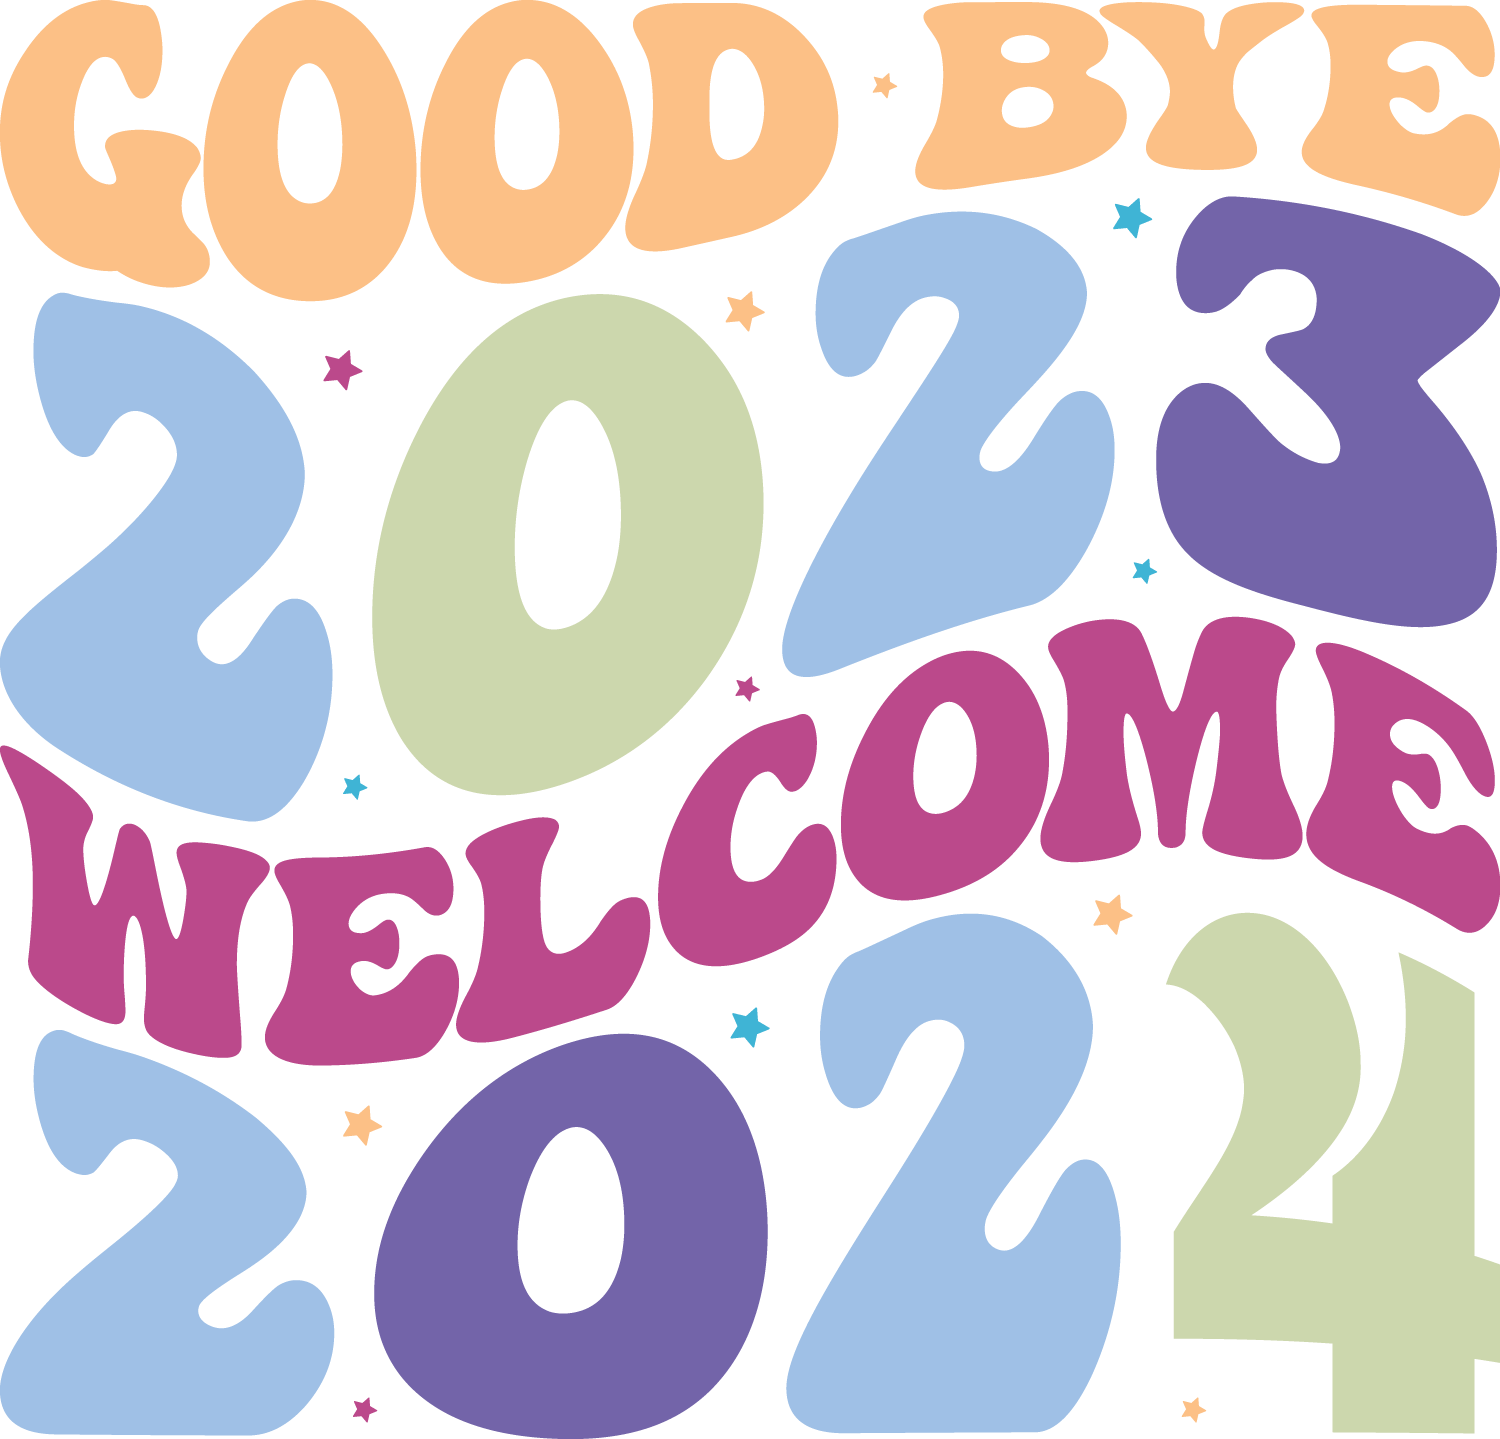 Goodbye 2023 Welcome New Year 2024 Messages